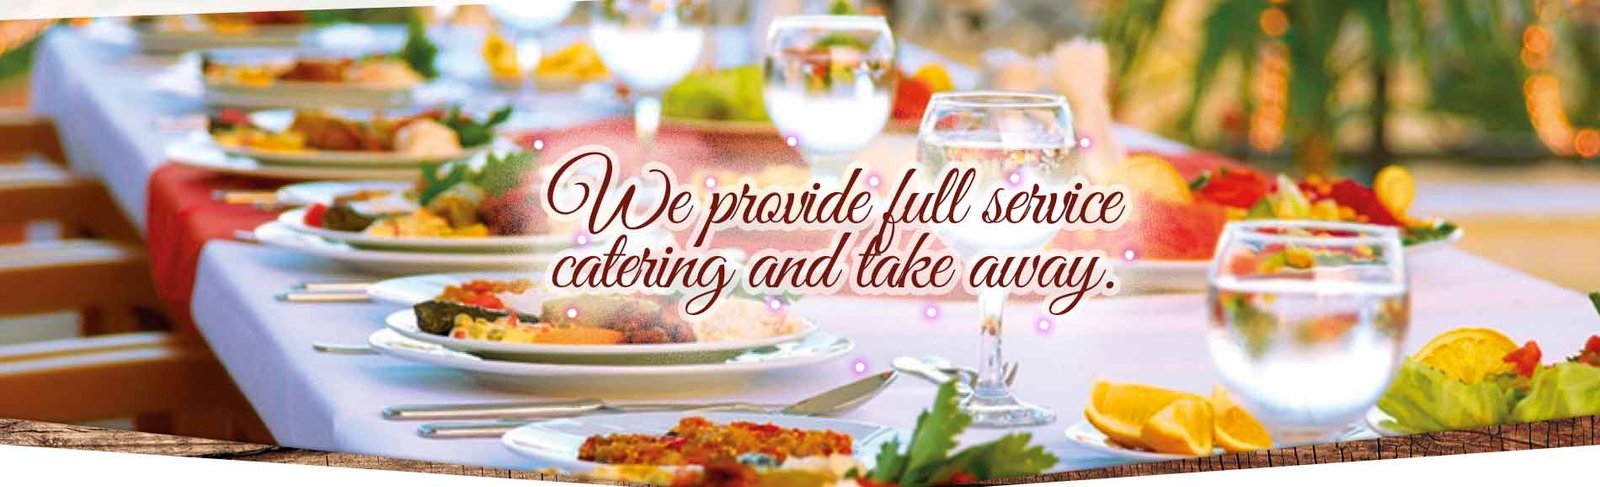 Catering and Restaurant Services in Hickman, NE Firth, NE